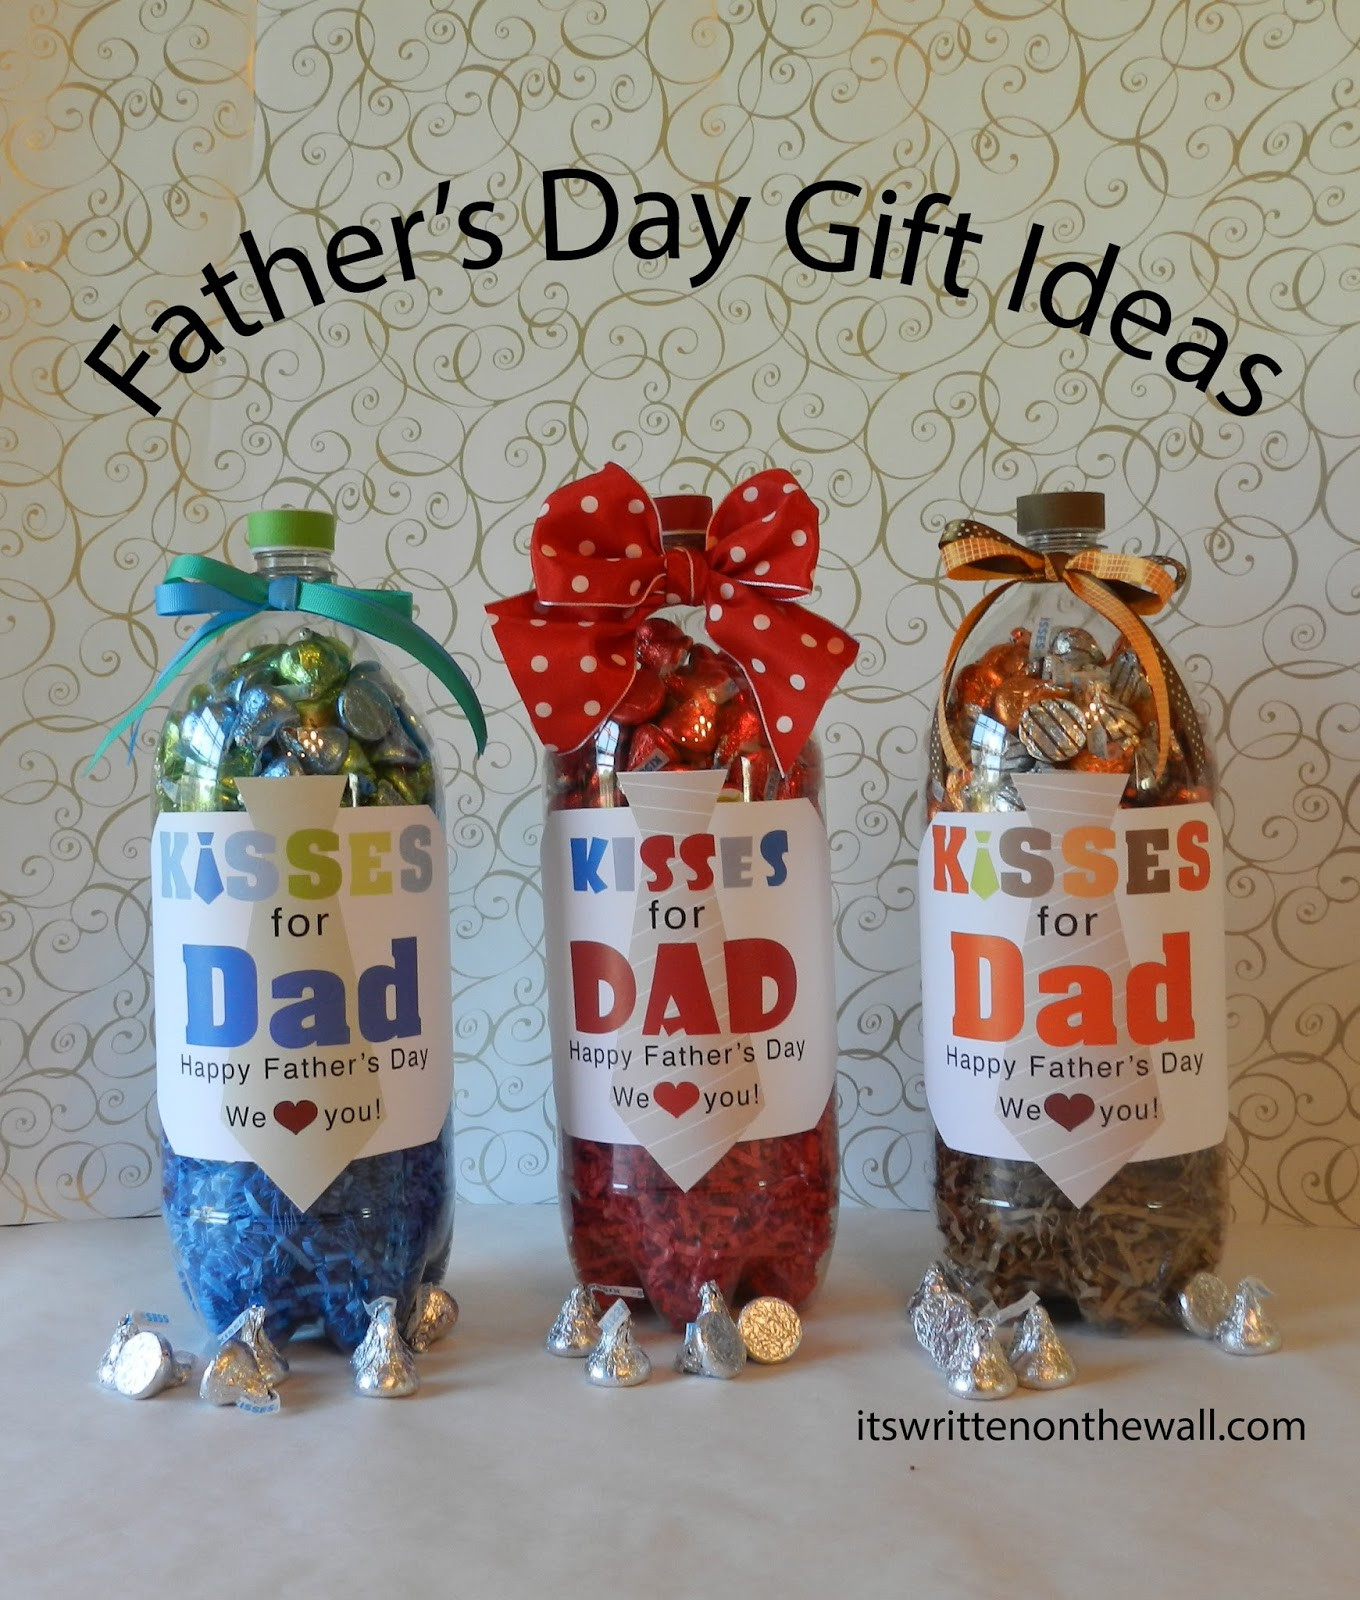 Simple Fathers Day Gift Ideas
 It s Written on the Wall Fathers Day Gift Ideas For the